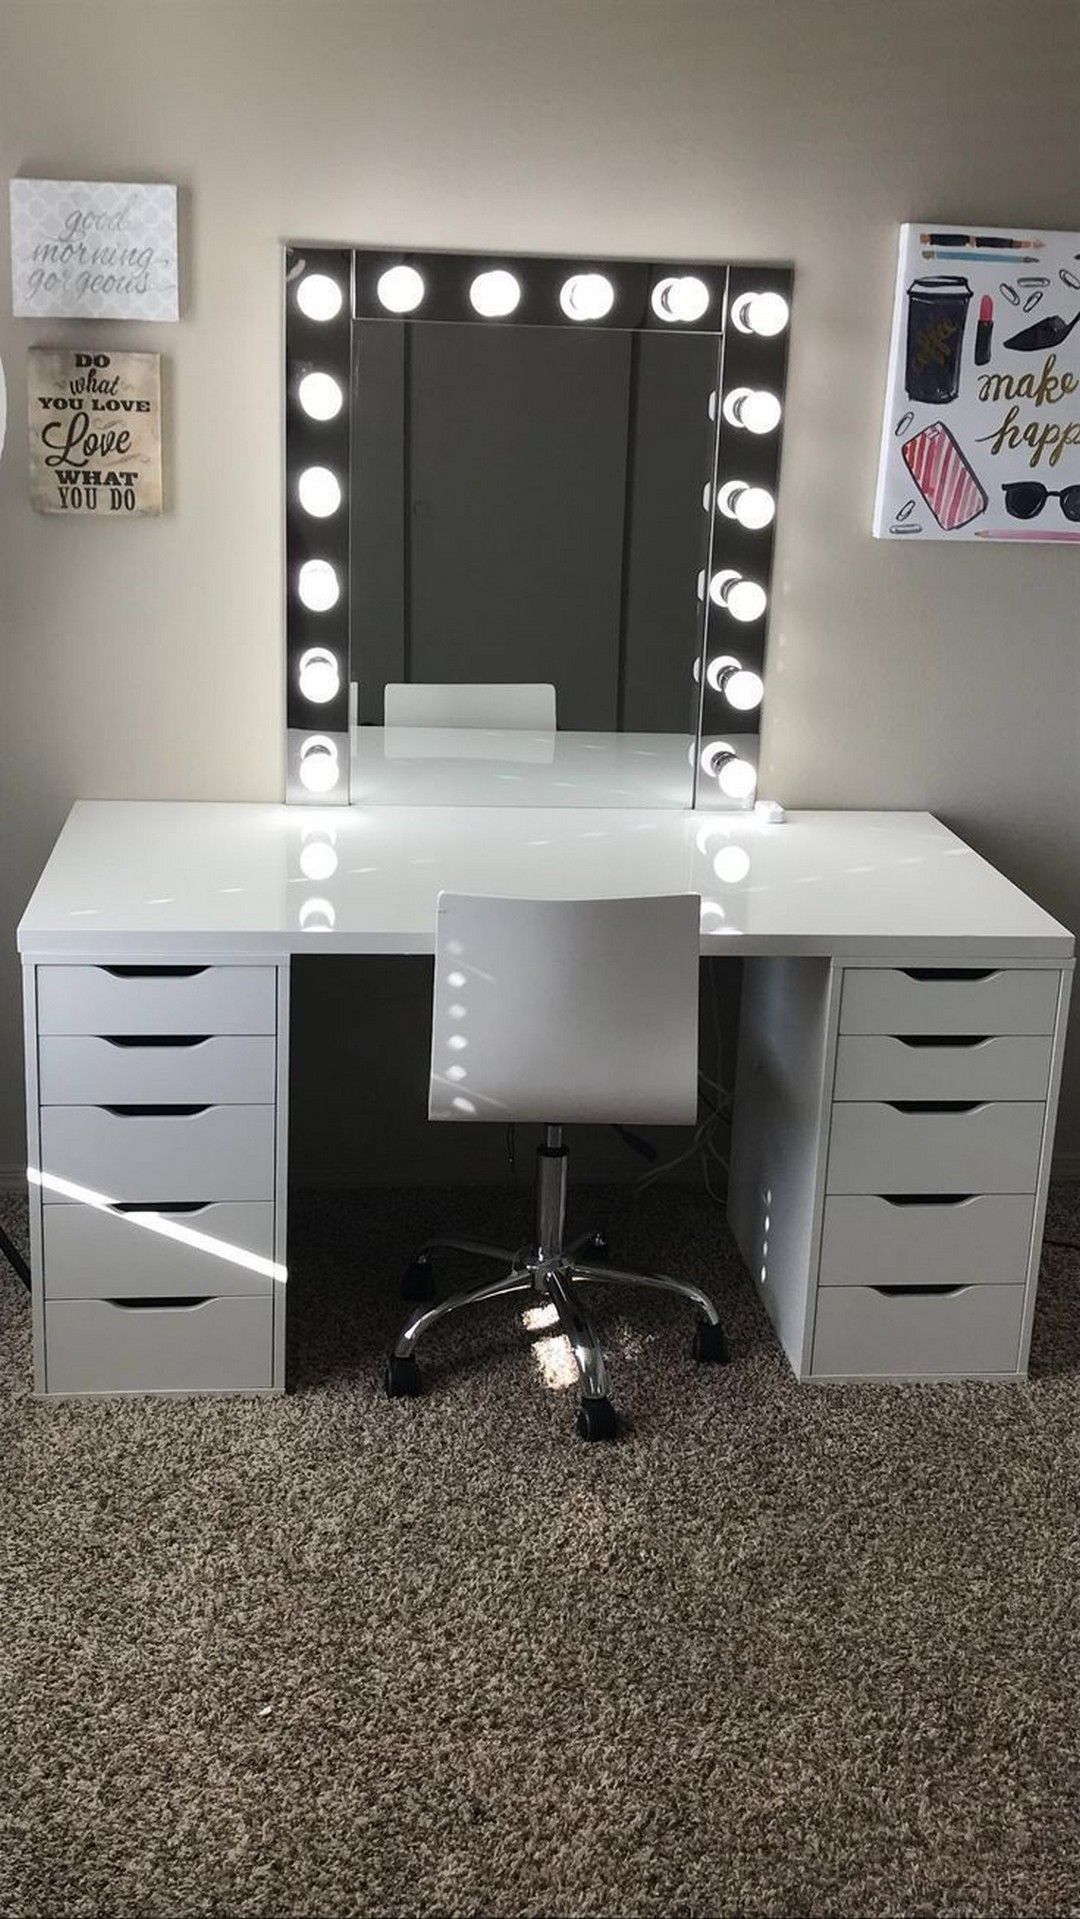 28 We love The Elegant Makeup Room Ideas By Some Of The Best - 28 We love The Elegant Makeup Room Ideas By Some Of The Best -   13 beauty Room diy ideas